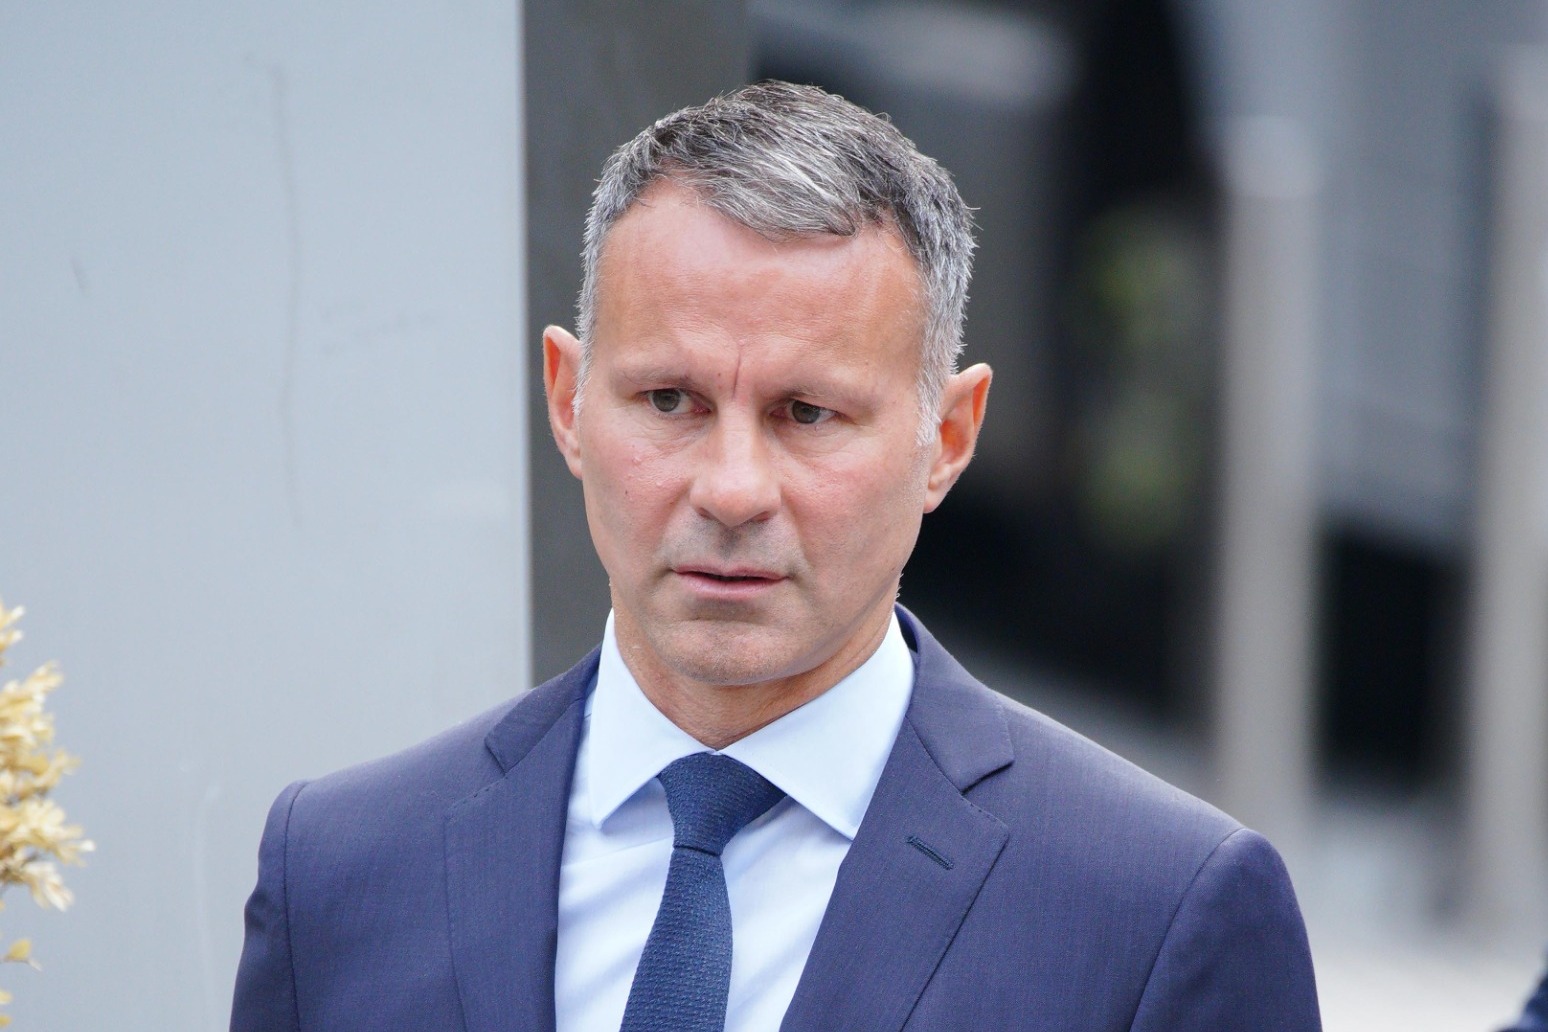 Employer of Giggs’ ex-girlfriend tried to block his ‘intense’ emails, court told 